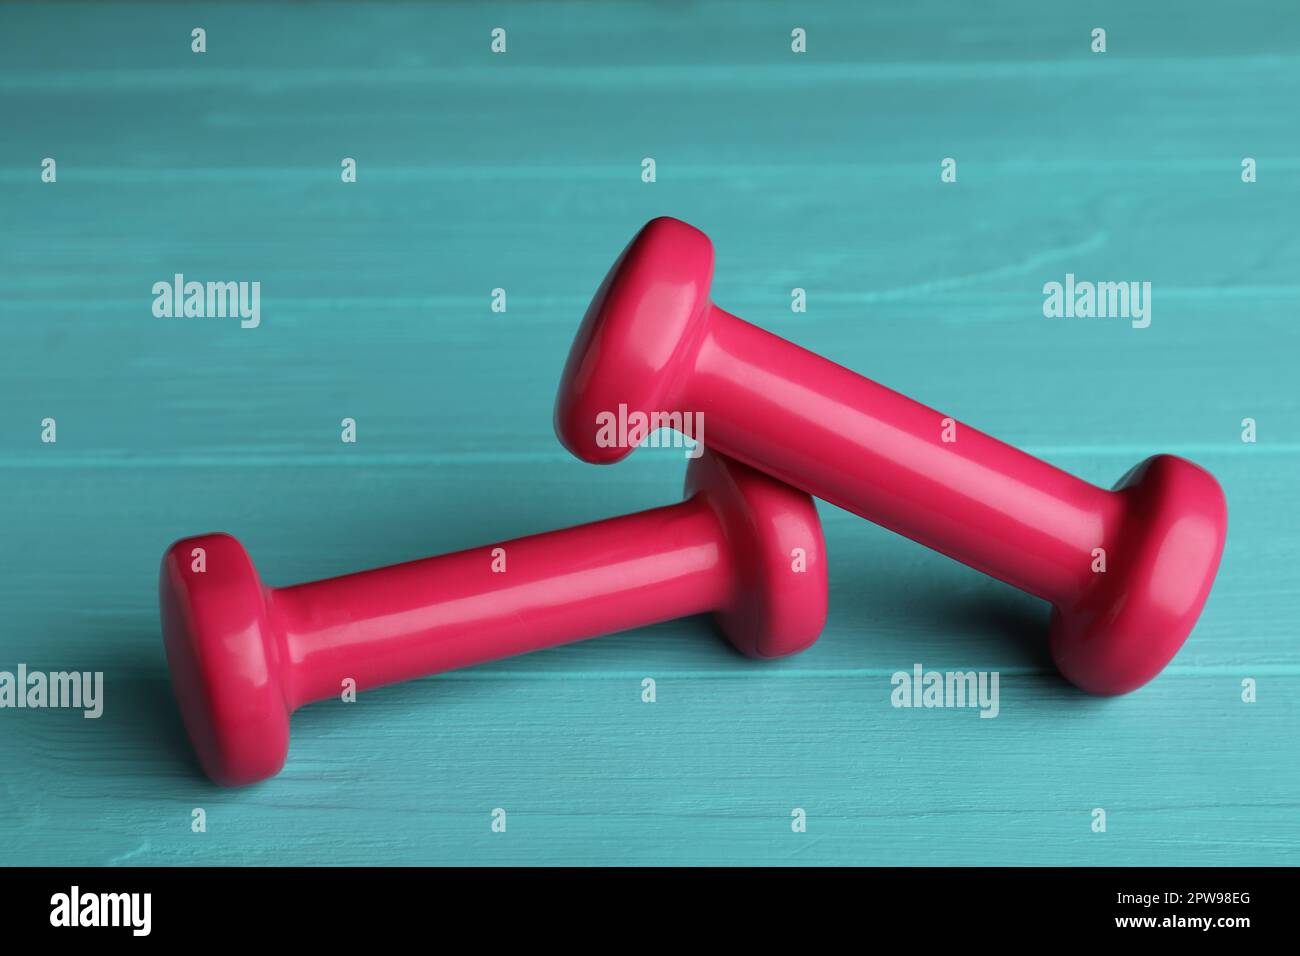 Pink vinyl dumbbells on turquoise wooden table Stock Photo